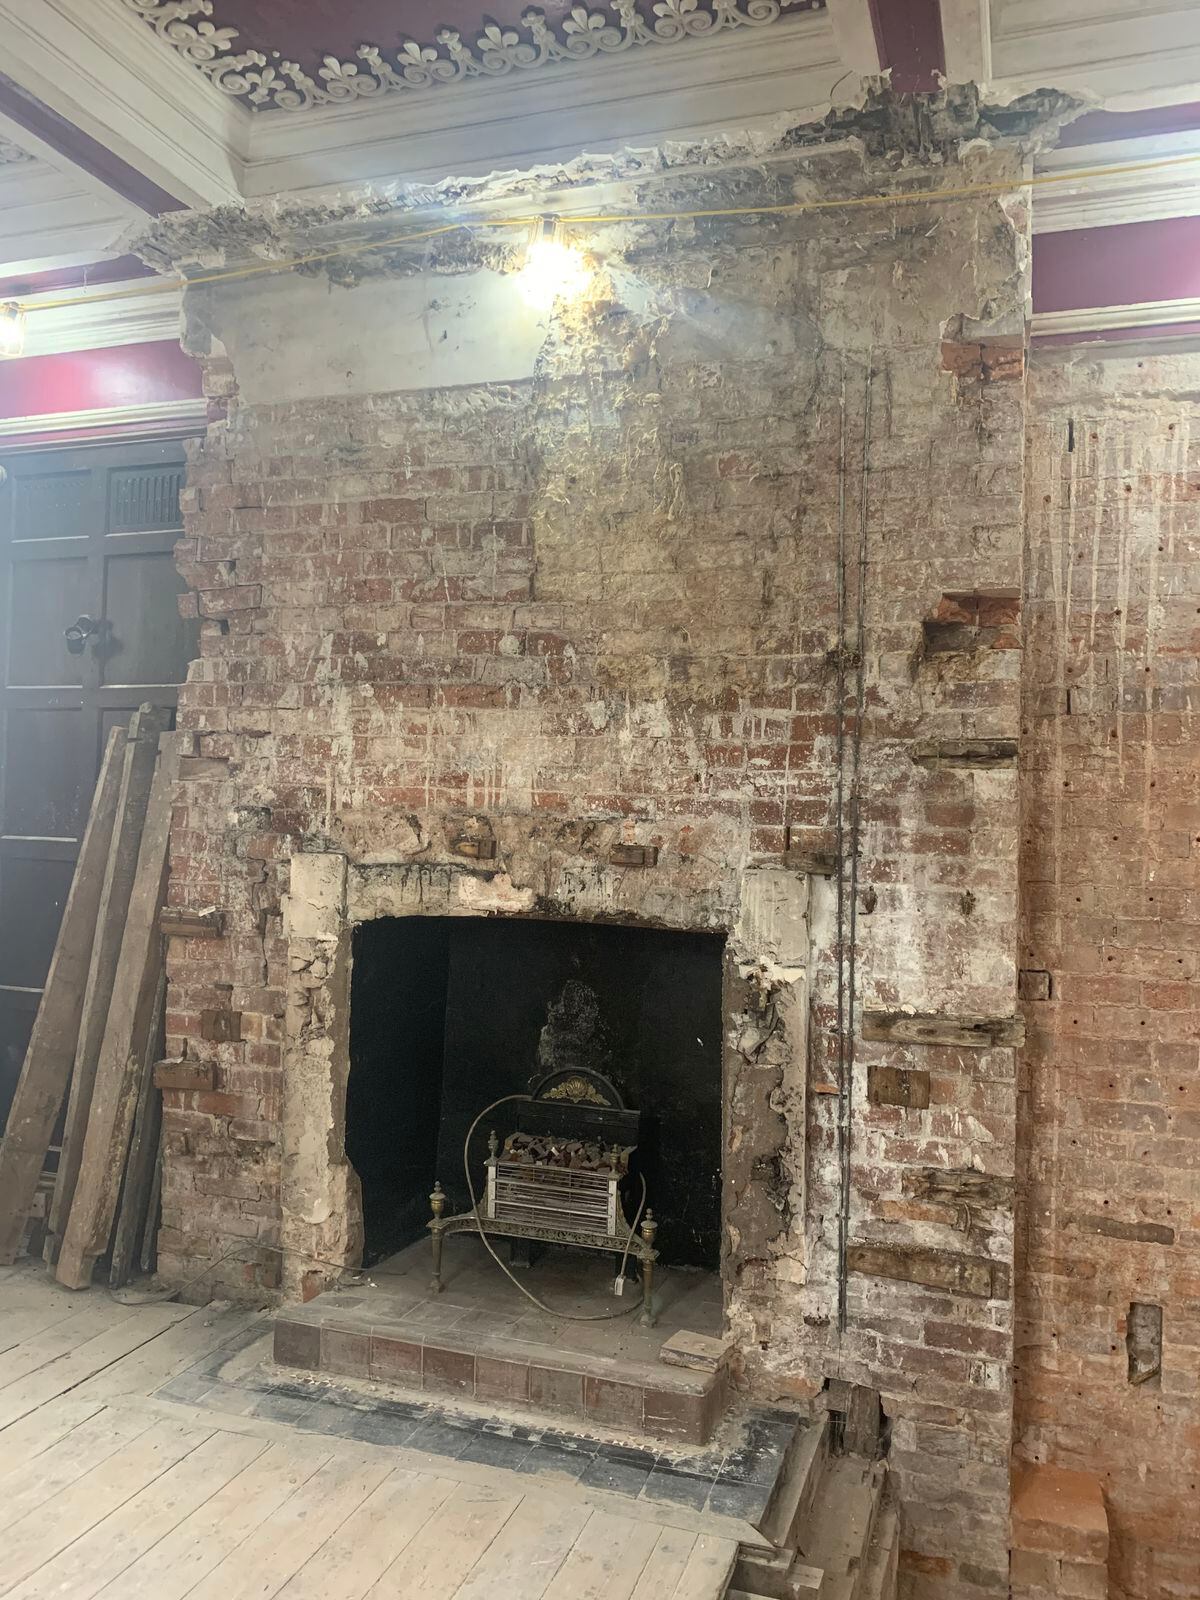 The fireplace at Seighford Hall with the overmantel removed. Photo courtesy of Stafford Borough Council